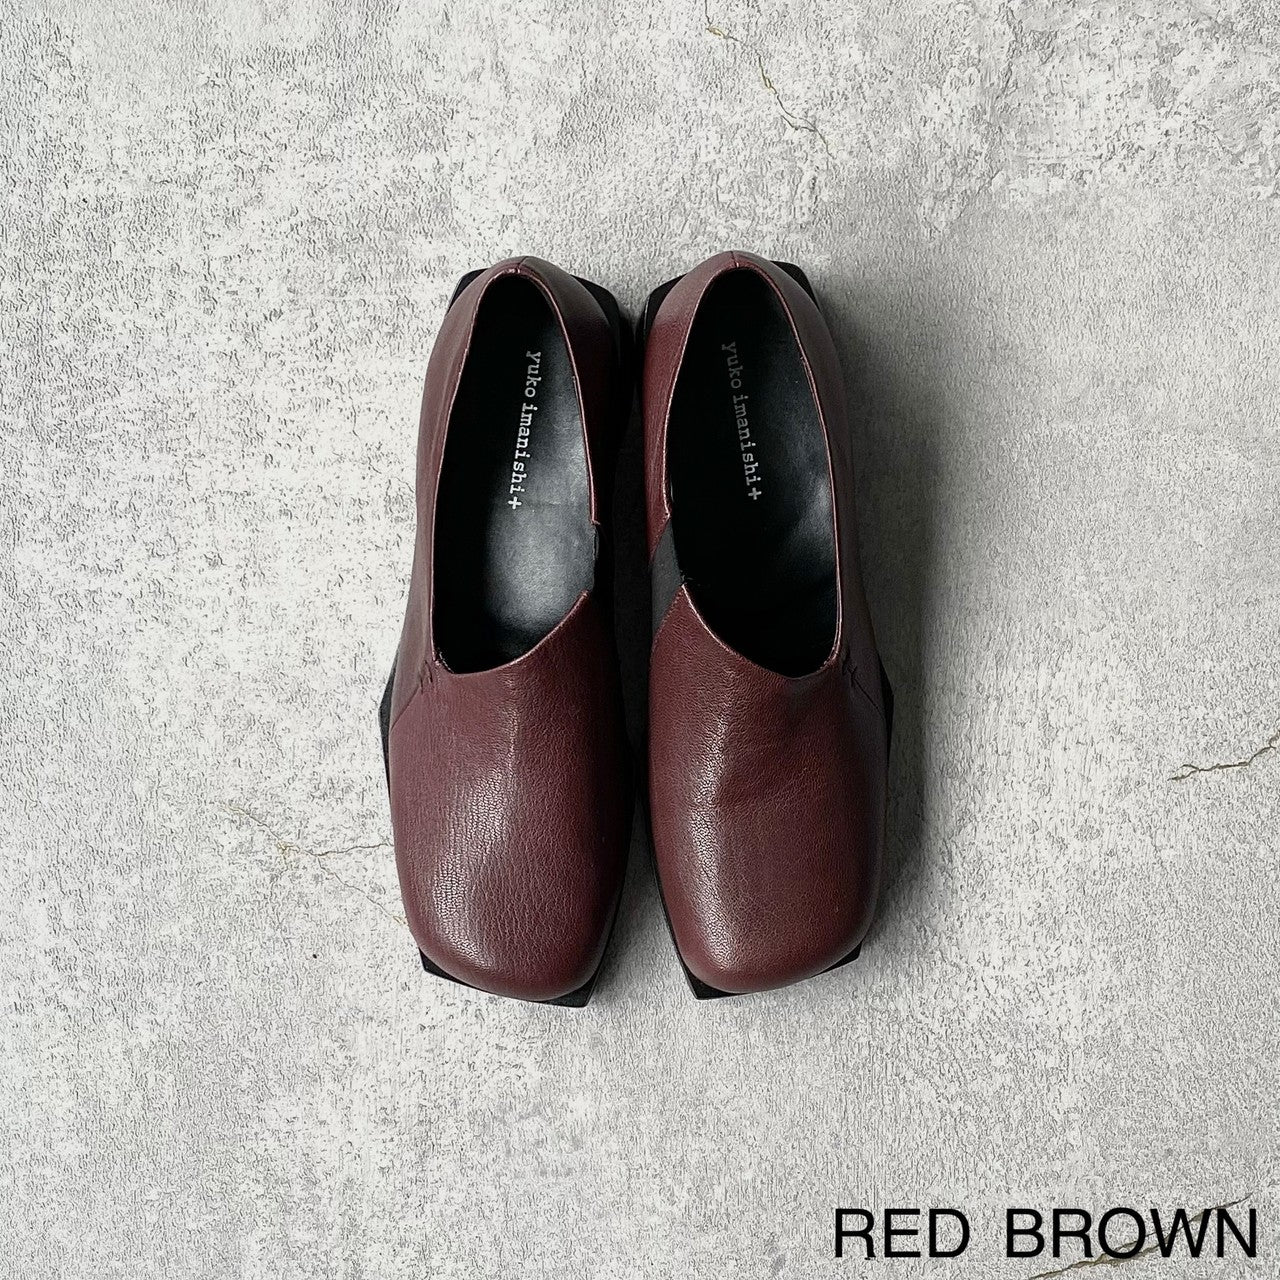 RED BROWN / 35 (22.2cm)